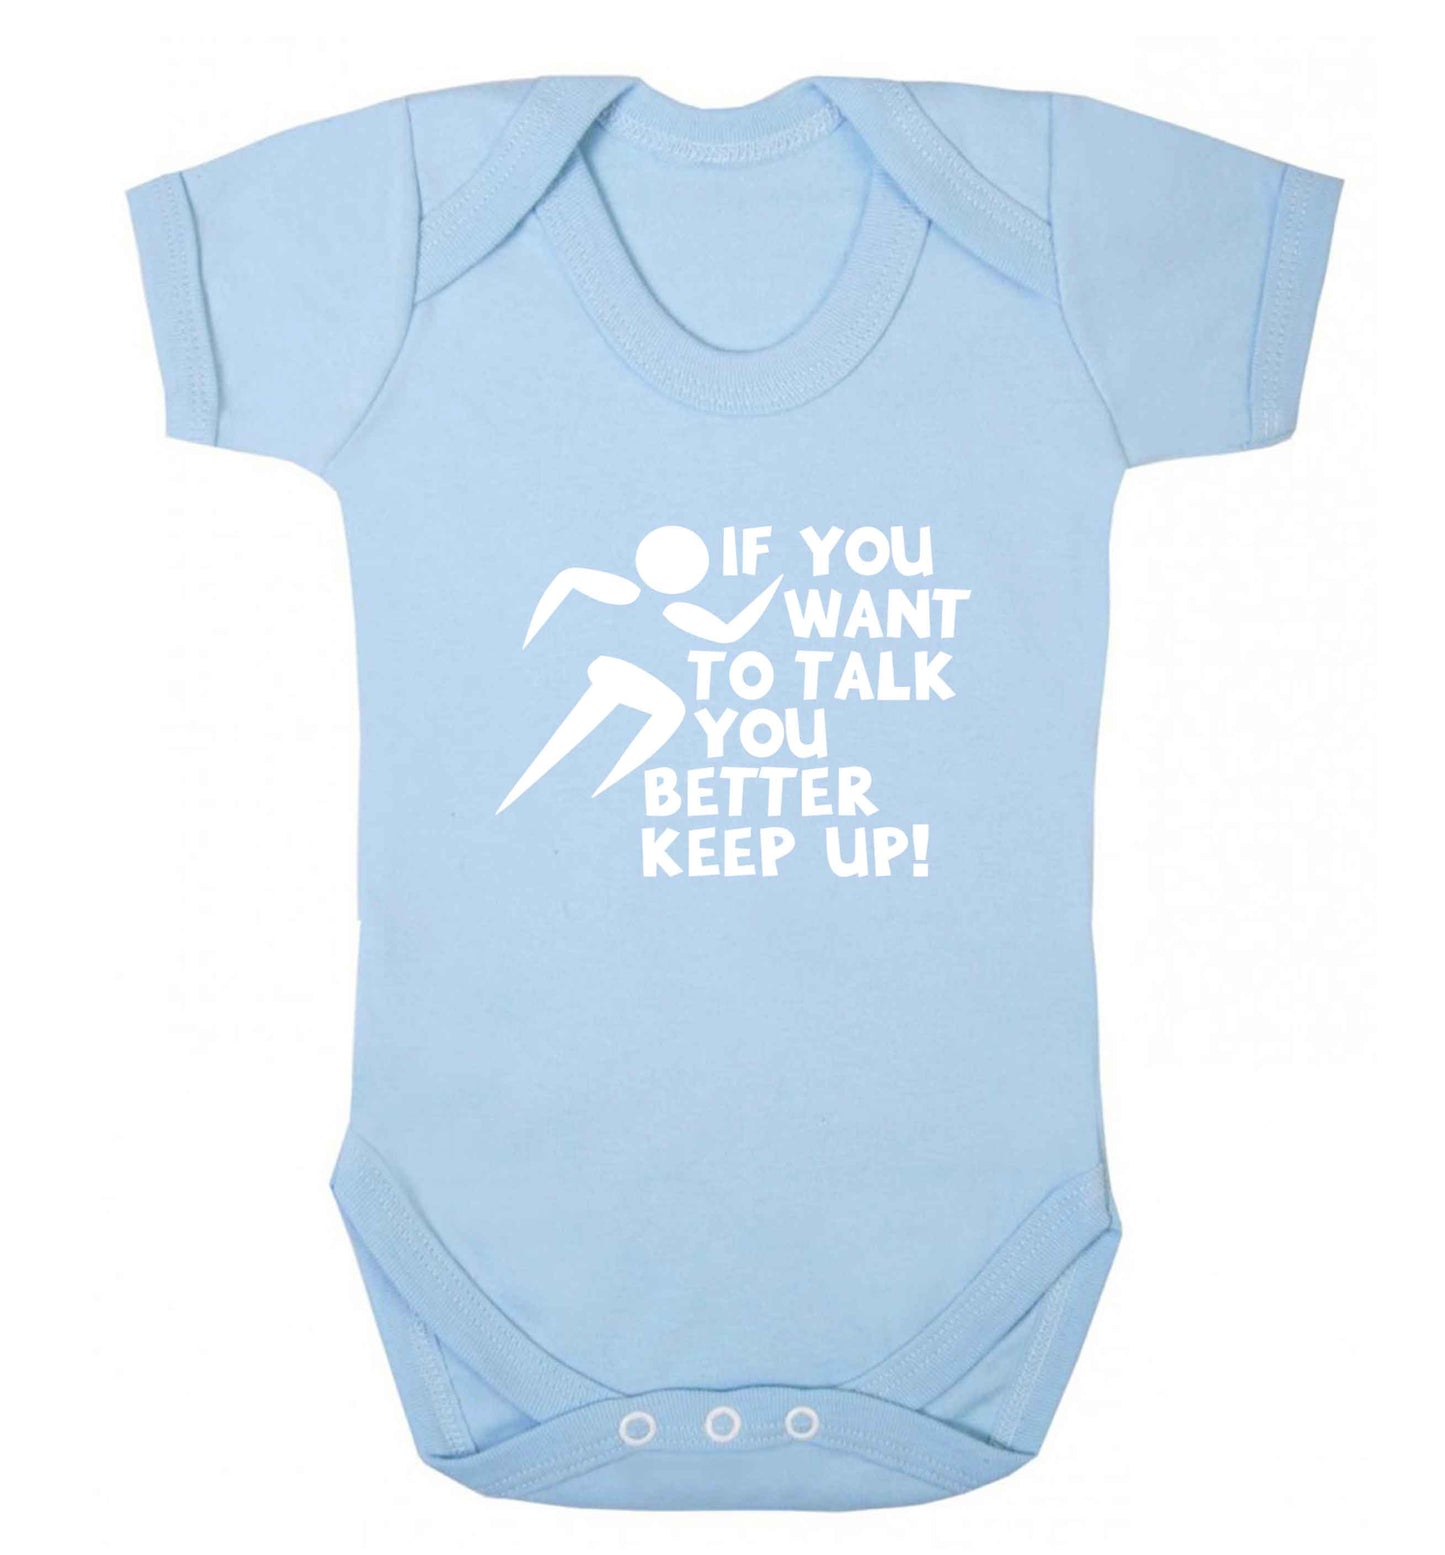 If you want to talk you better keep up! baby vest pale blue 18-24 months